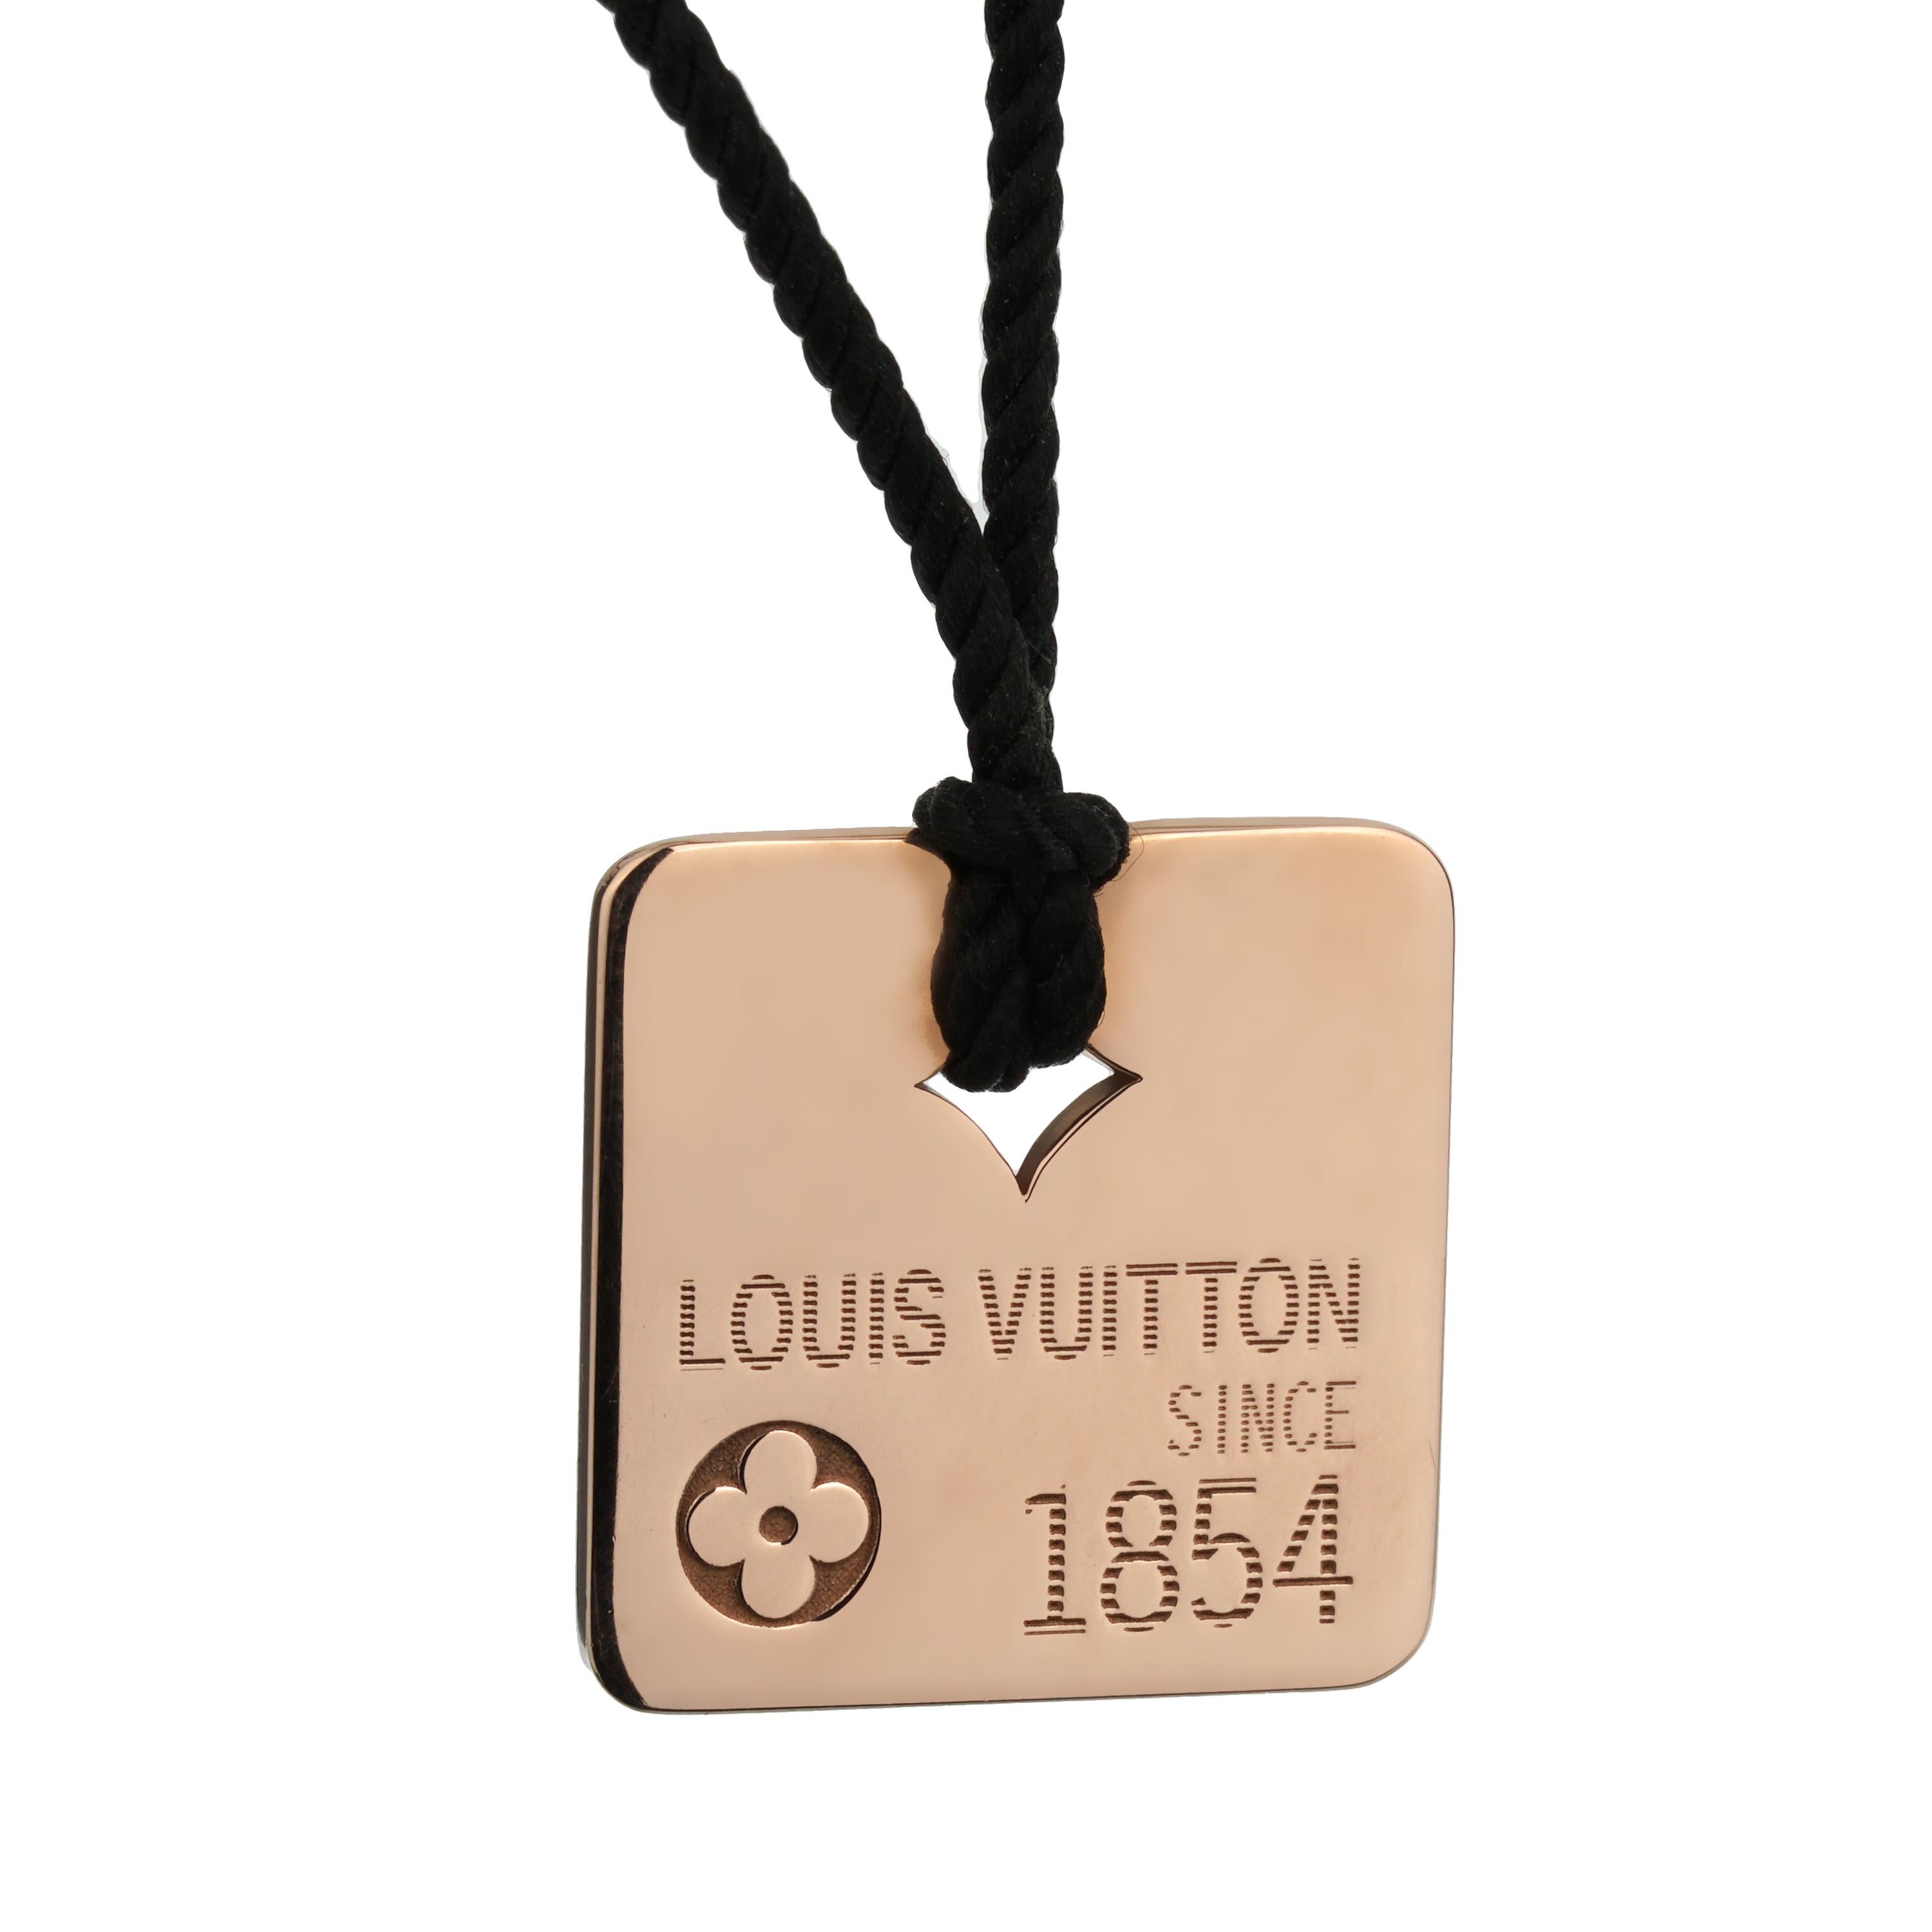 Elevate your style to new heights with the Louis Vuitton Dog Tag Square Pendant Necklace—a luxurious blend of tradition and modernity. Crafted from 18k rose gold, this exquisite pendant hangs from an adjustable string necklace, offering a